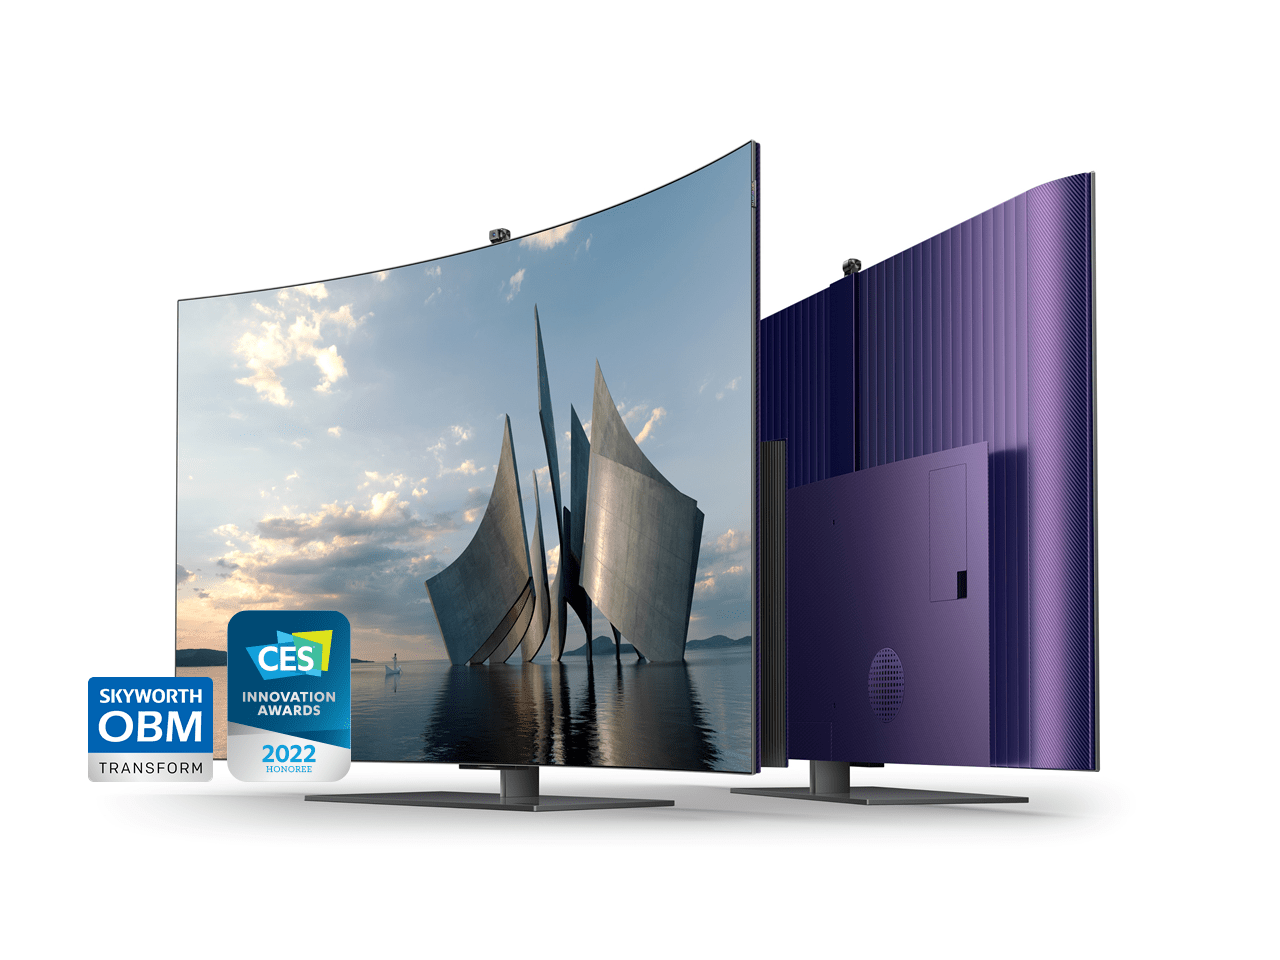 SKYWORTH’s Flagship W82 TV Named as CES 2022 Innovation Awards Honoree